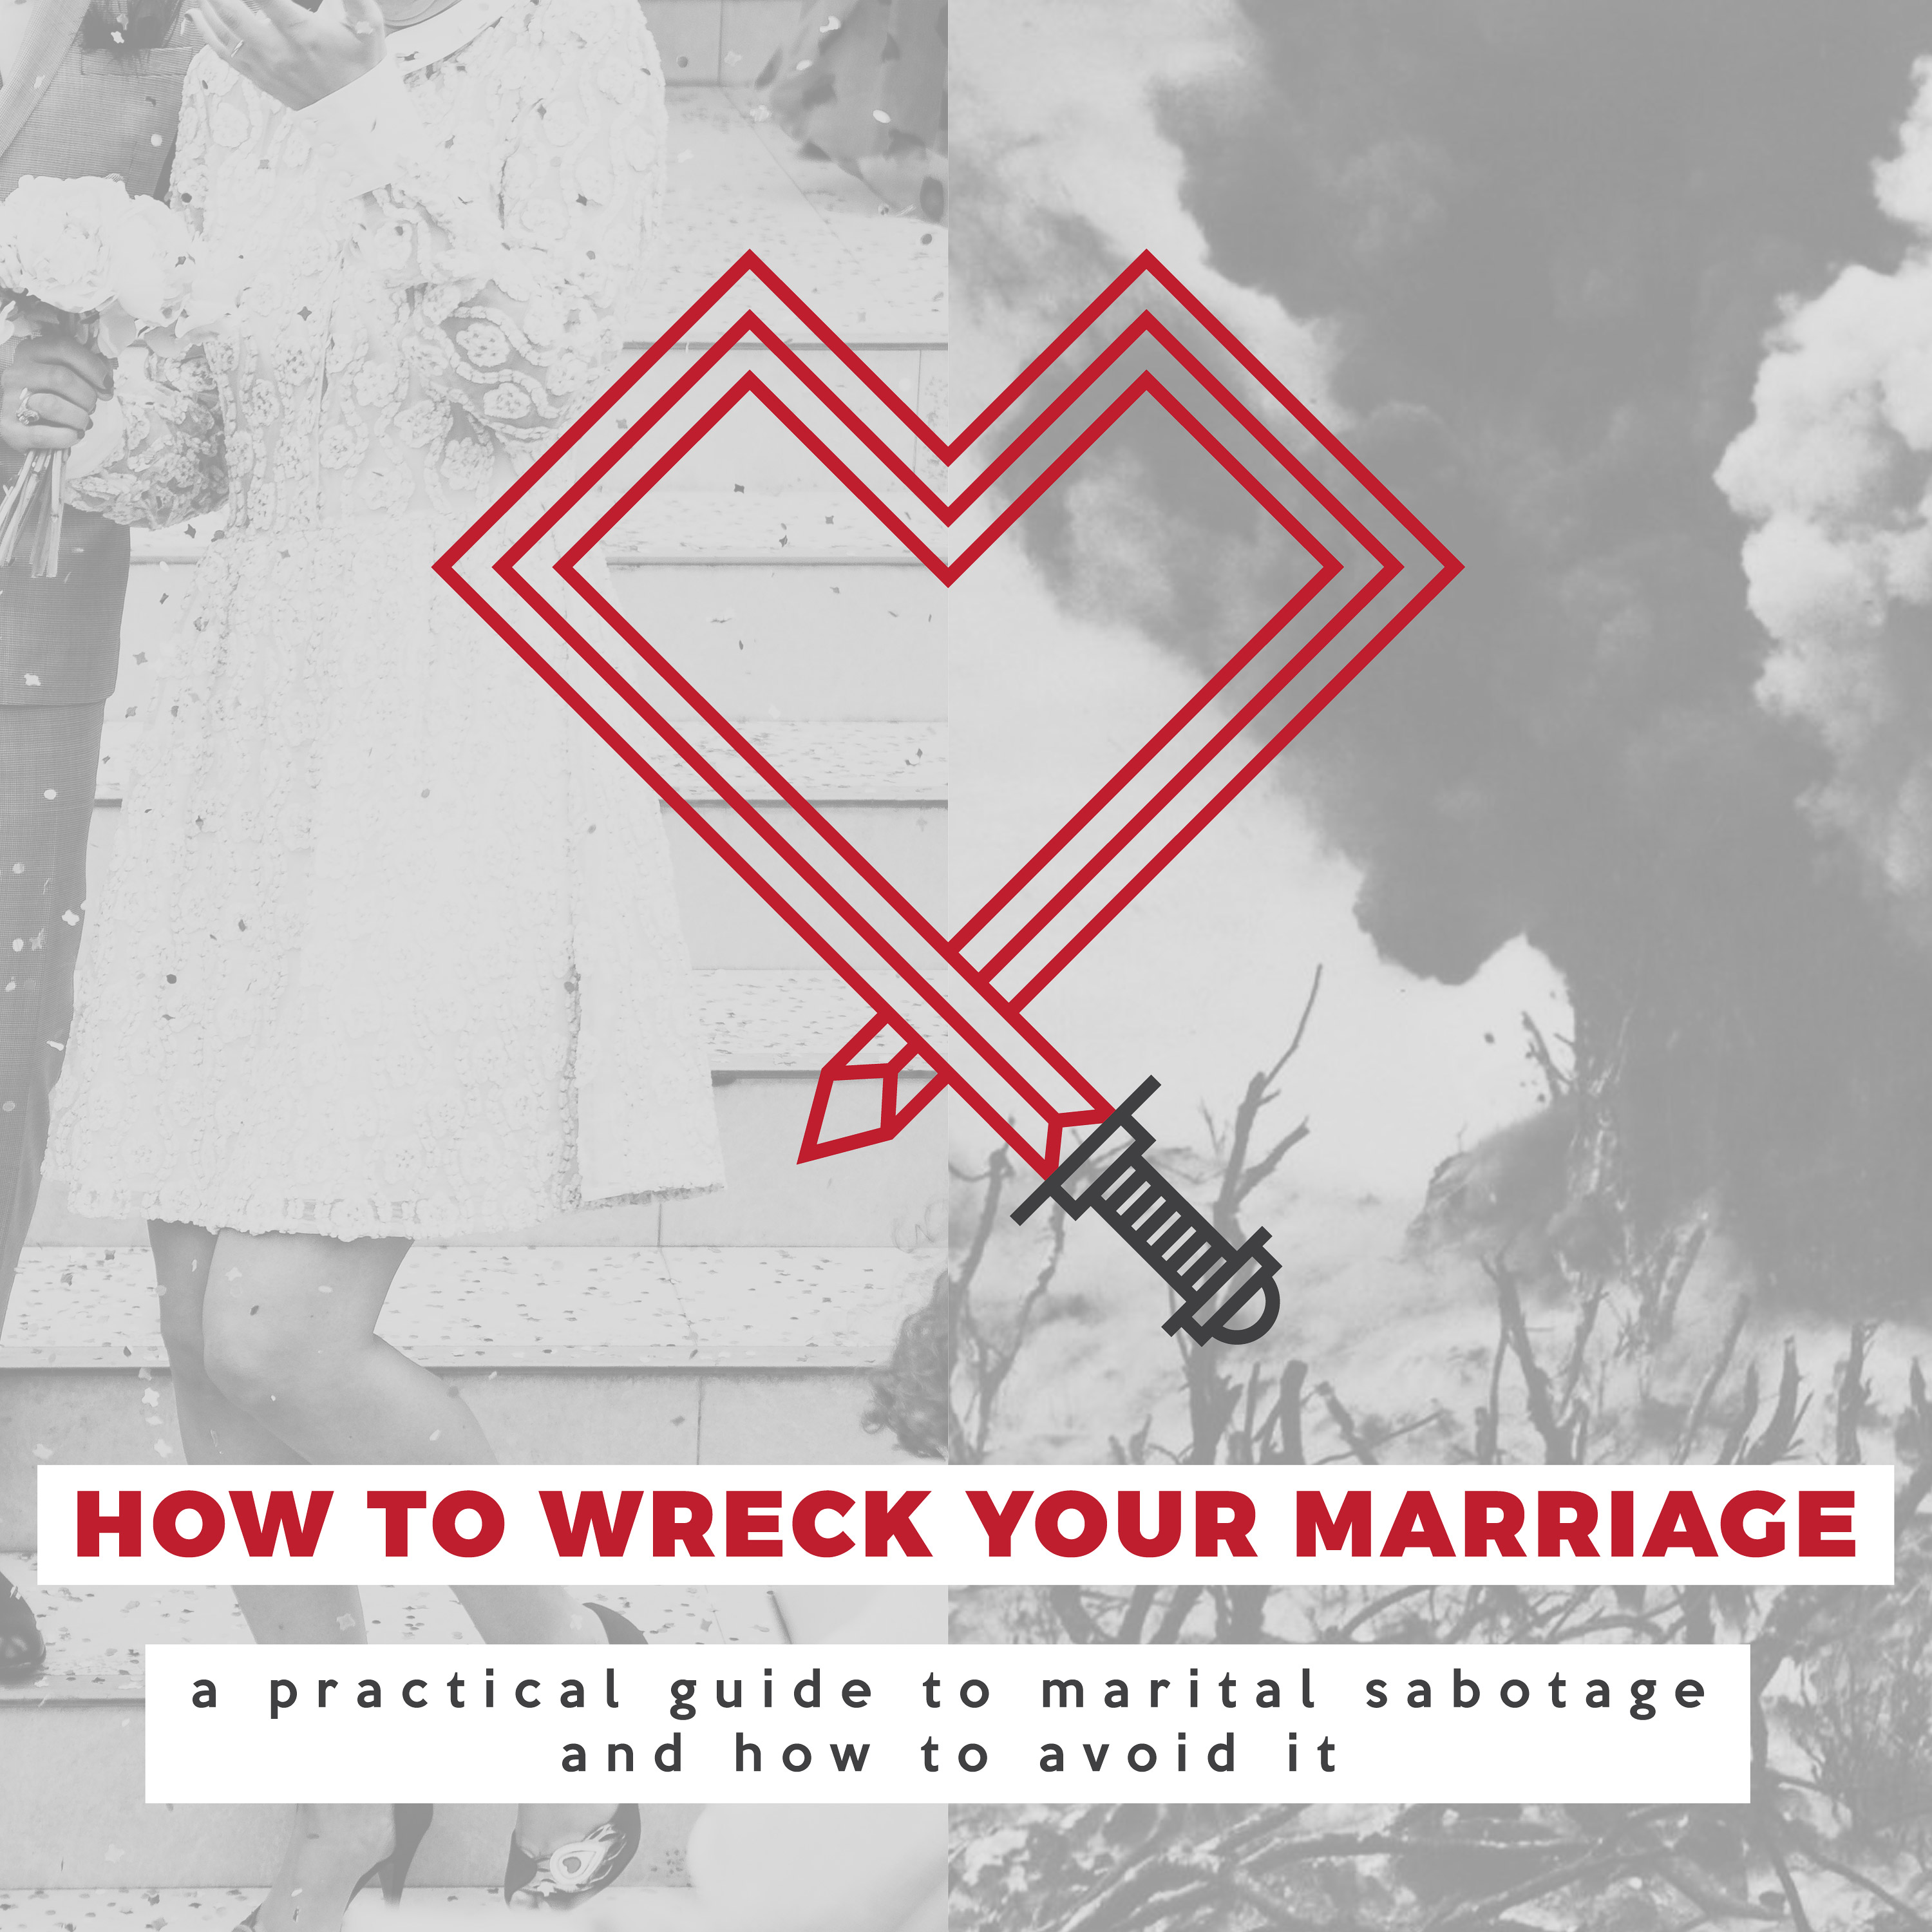 How To Wreck Your Marriage: Part 2